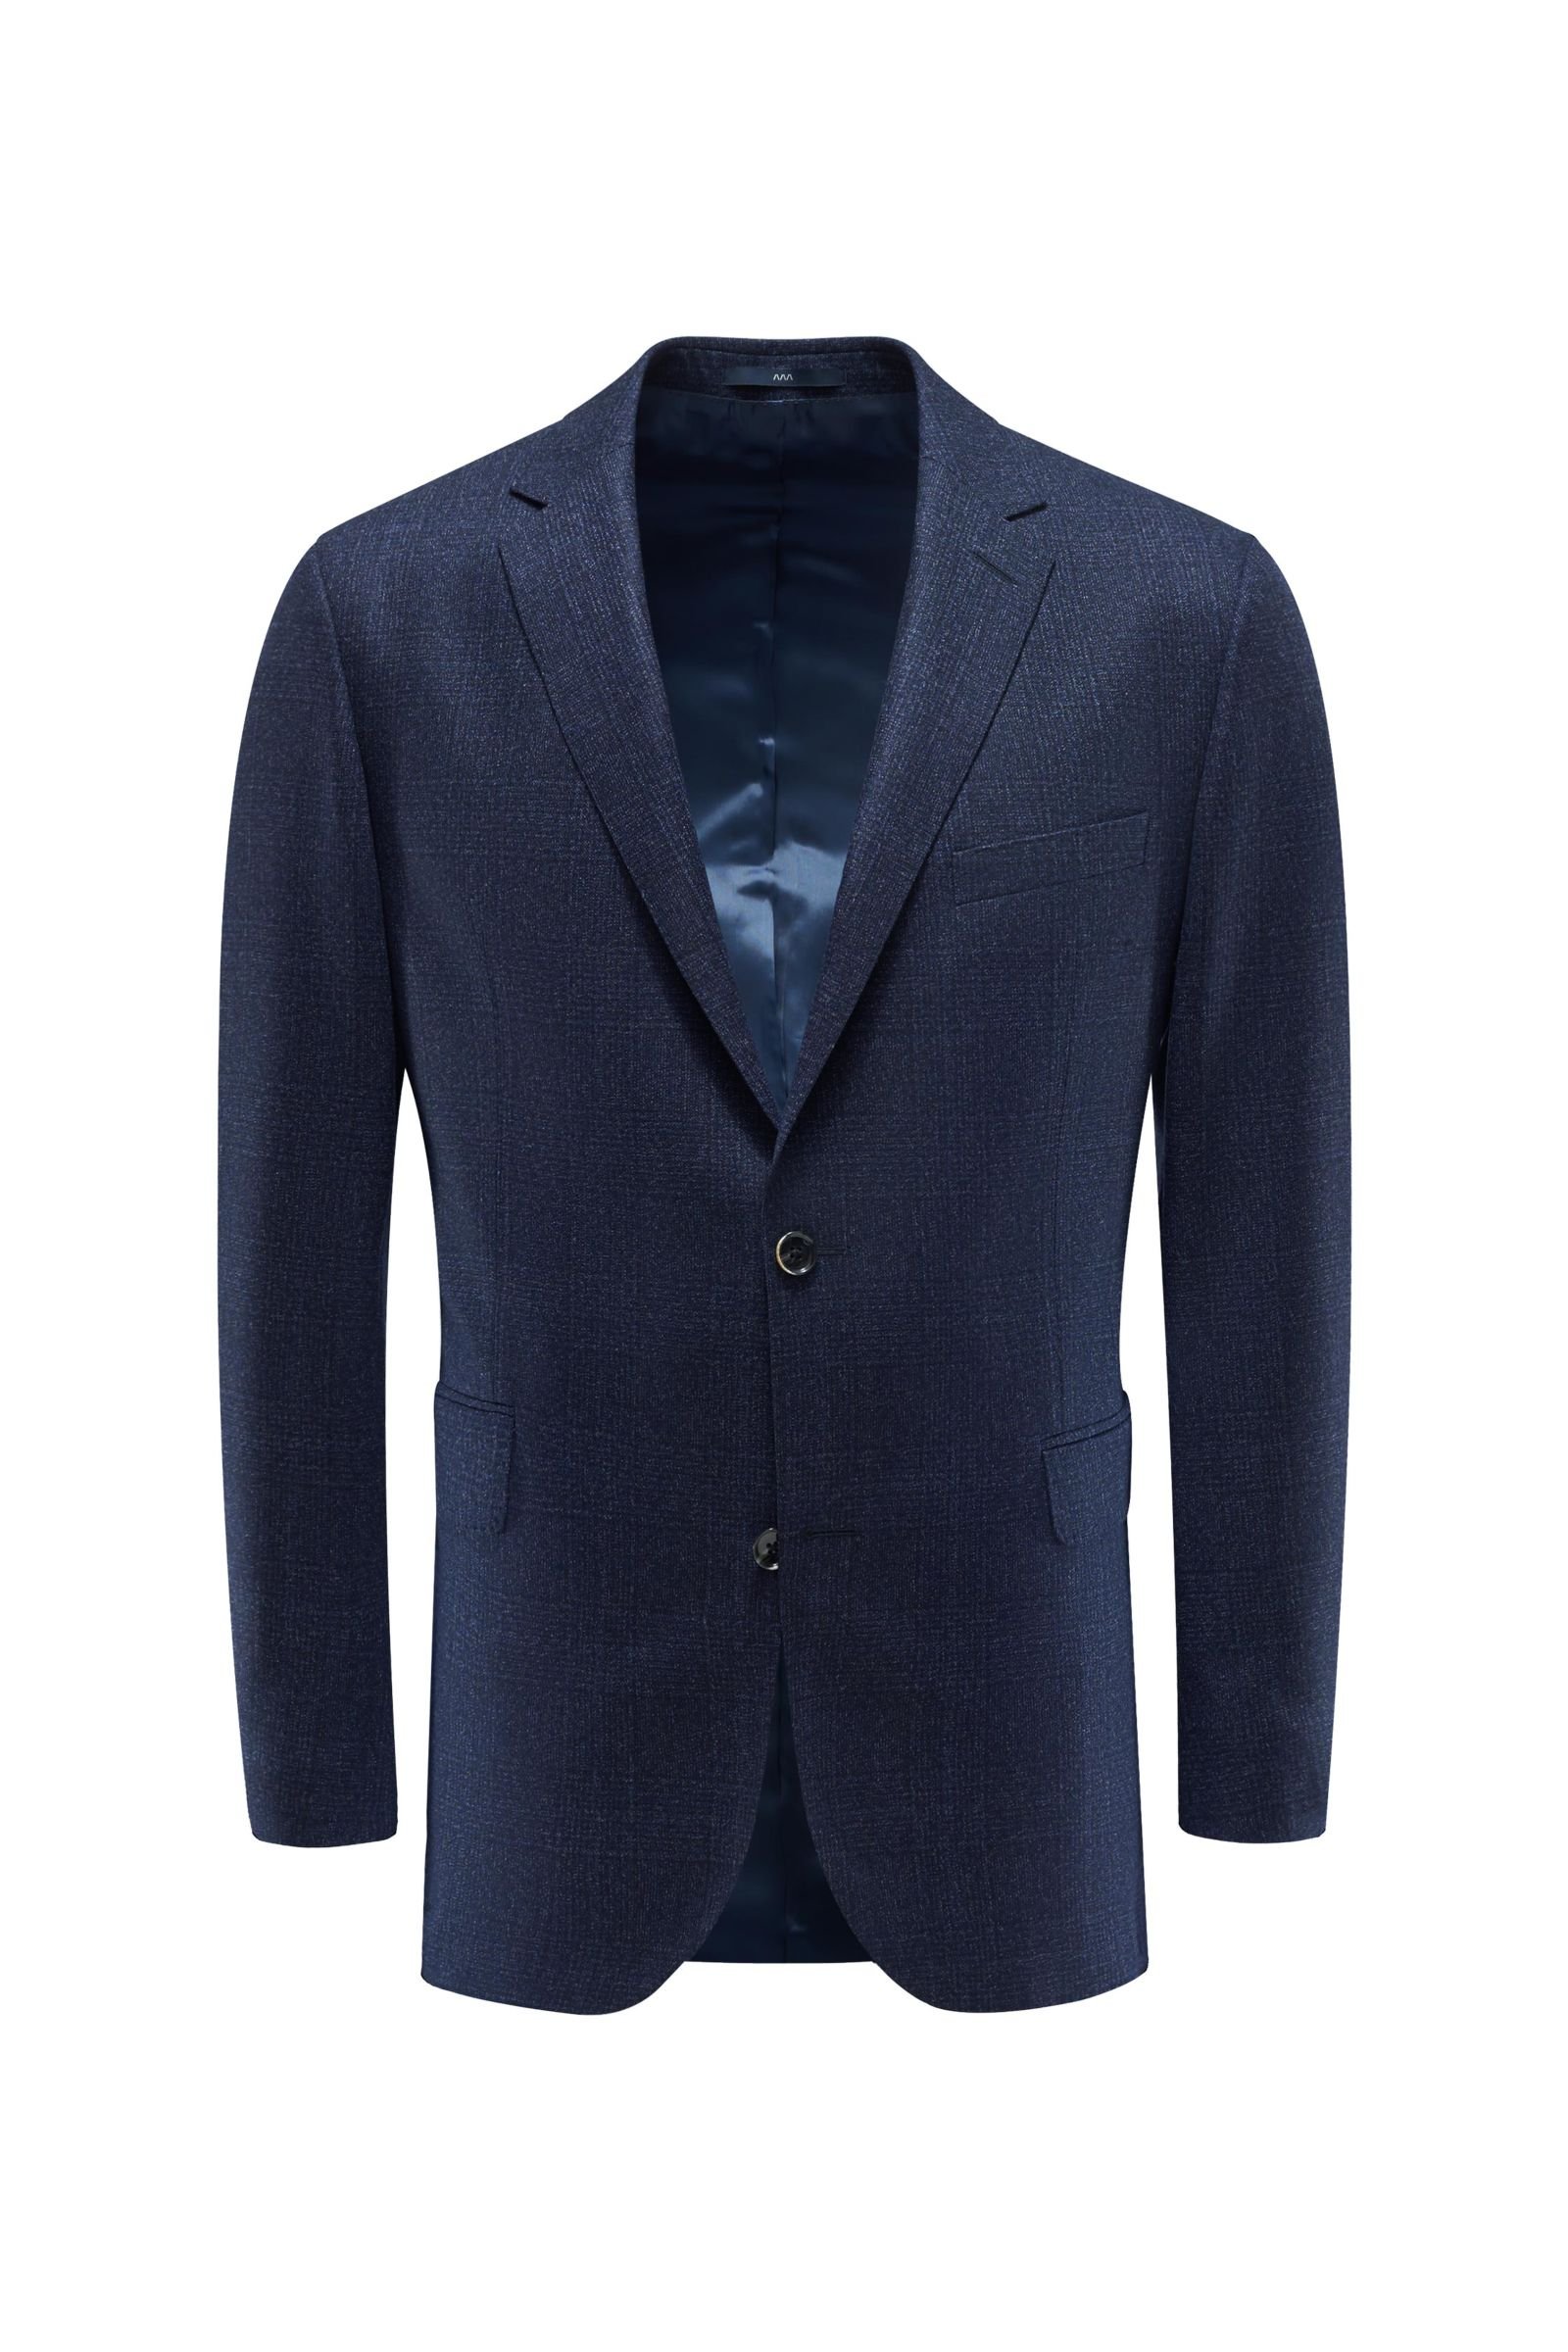 Smart-casual jacket navy checked